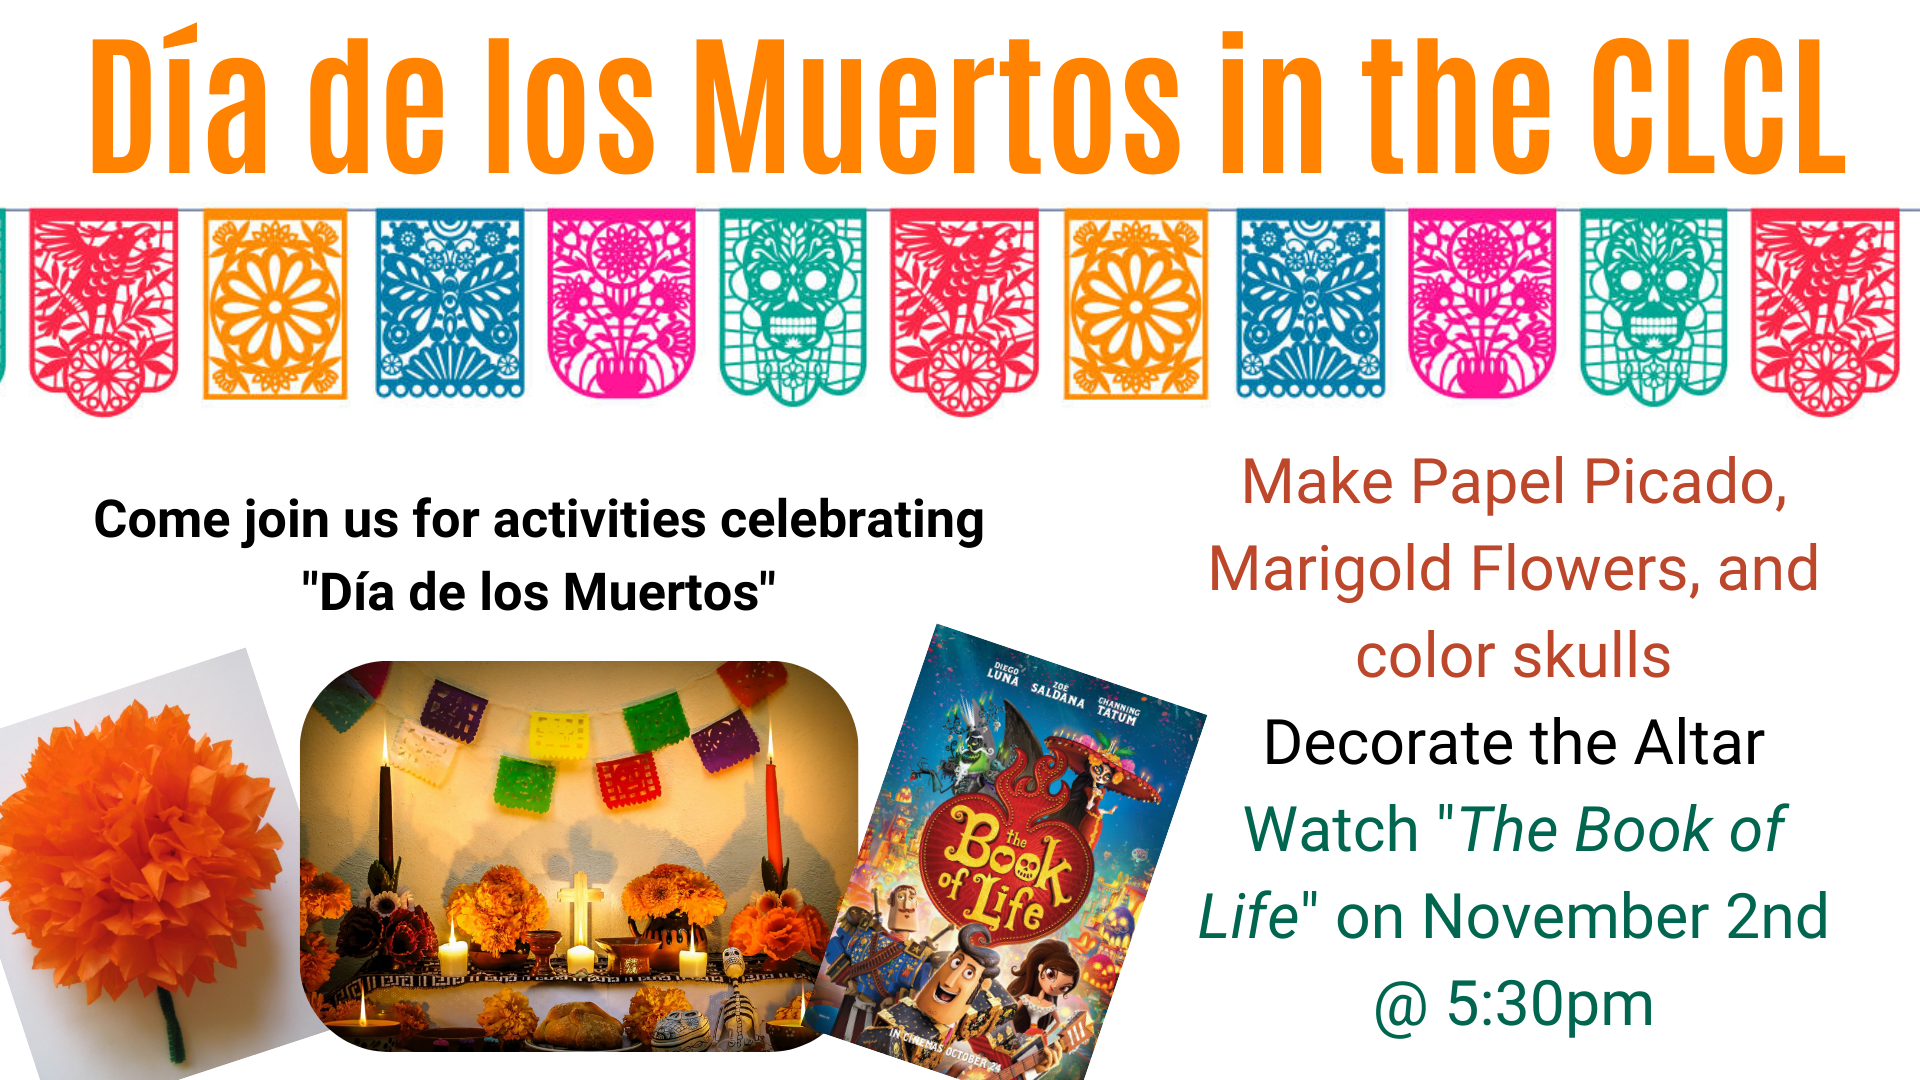 Día de los Muertos in the CLCL. Come join us for activities celebrating Día de los Muertos.  Make Papel Picado, Marigold Flowers, and color skulls. Decorate the Altar. Watch The Book of Life on November 2nd at 5:30pm.